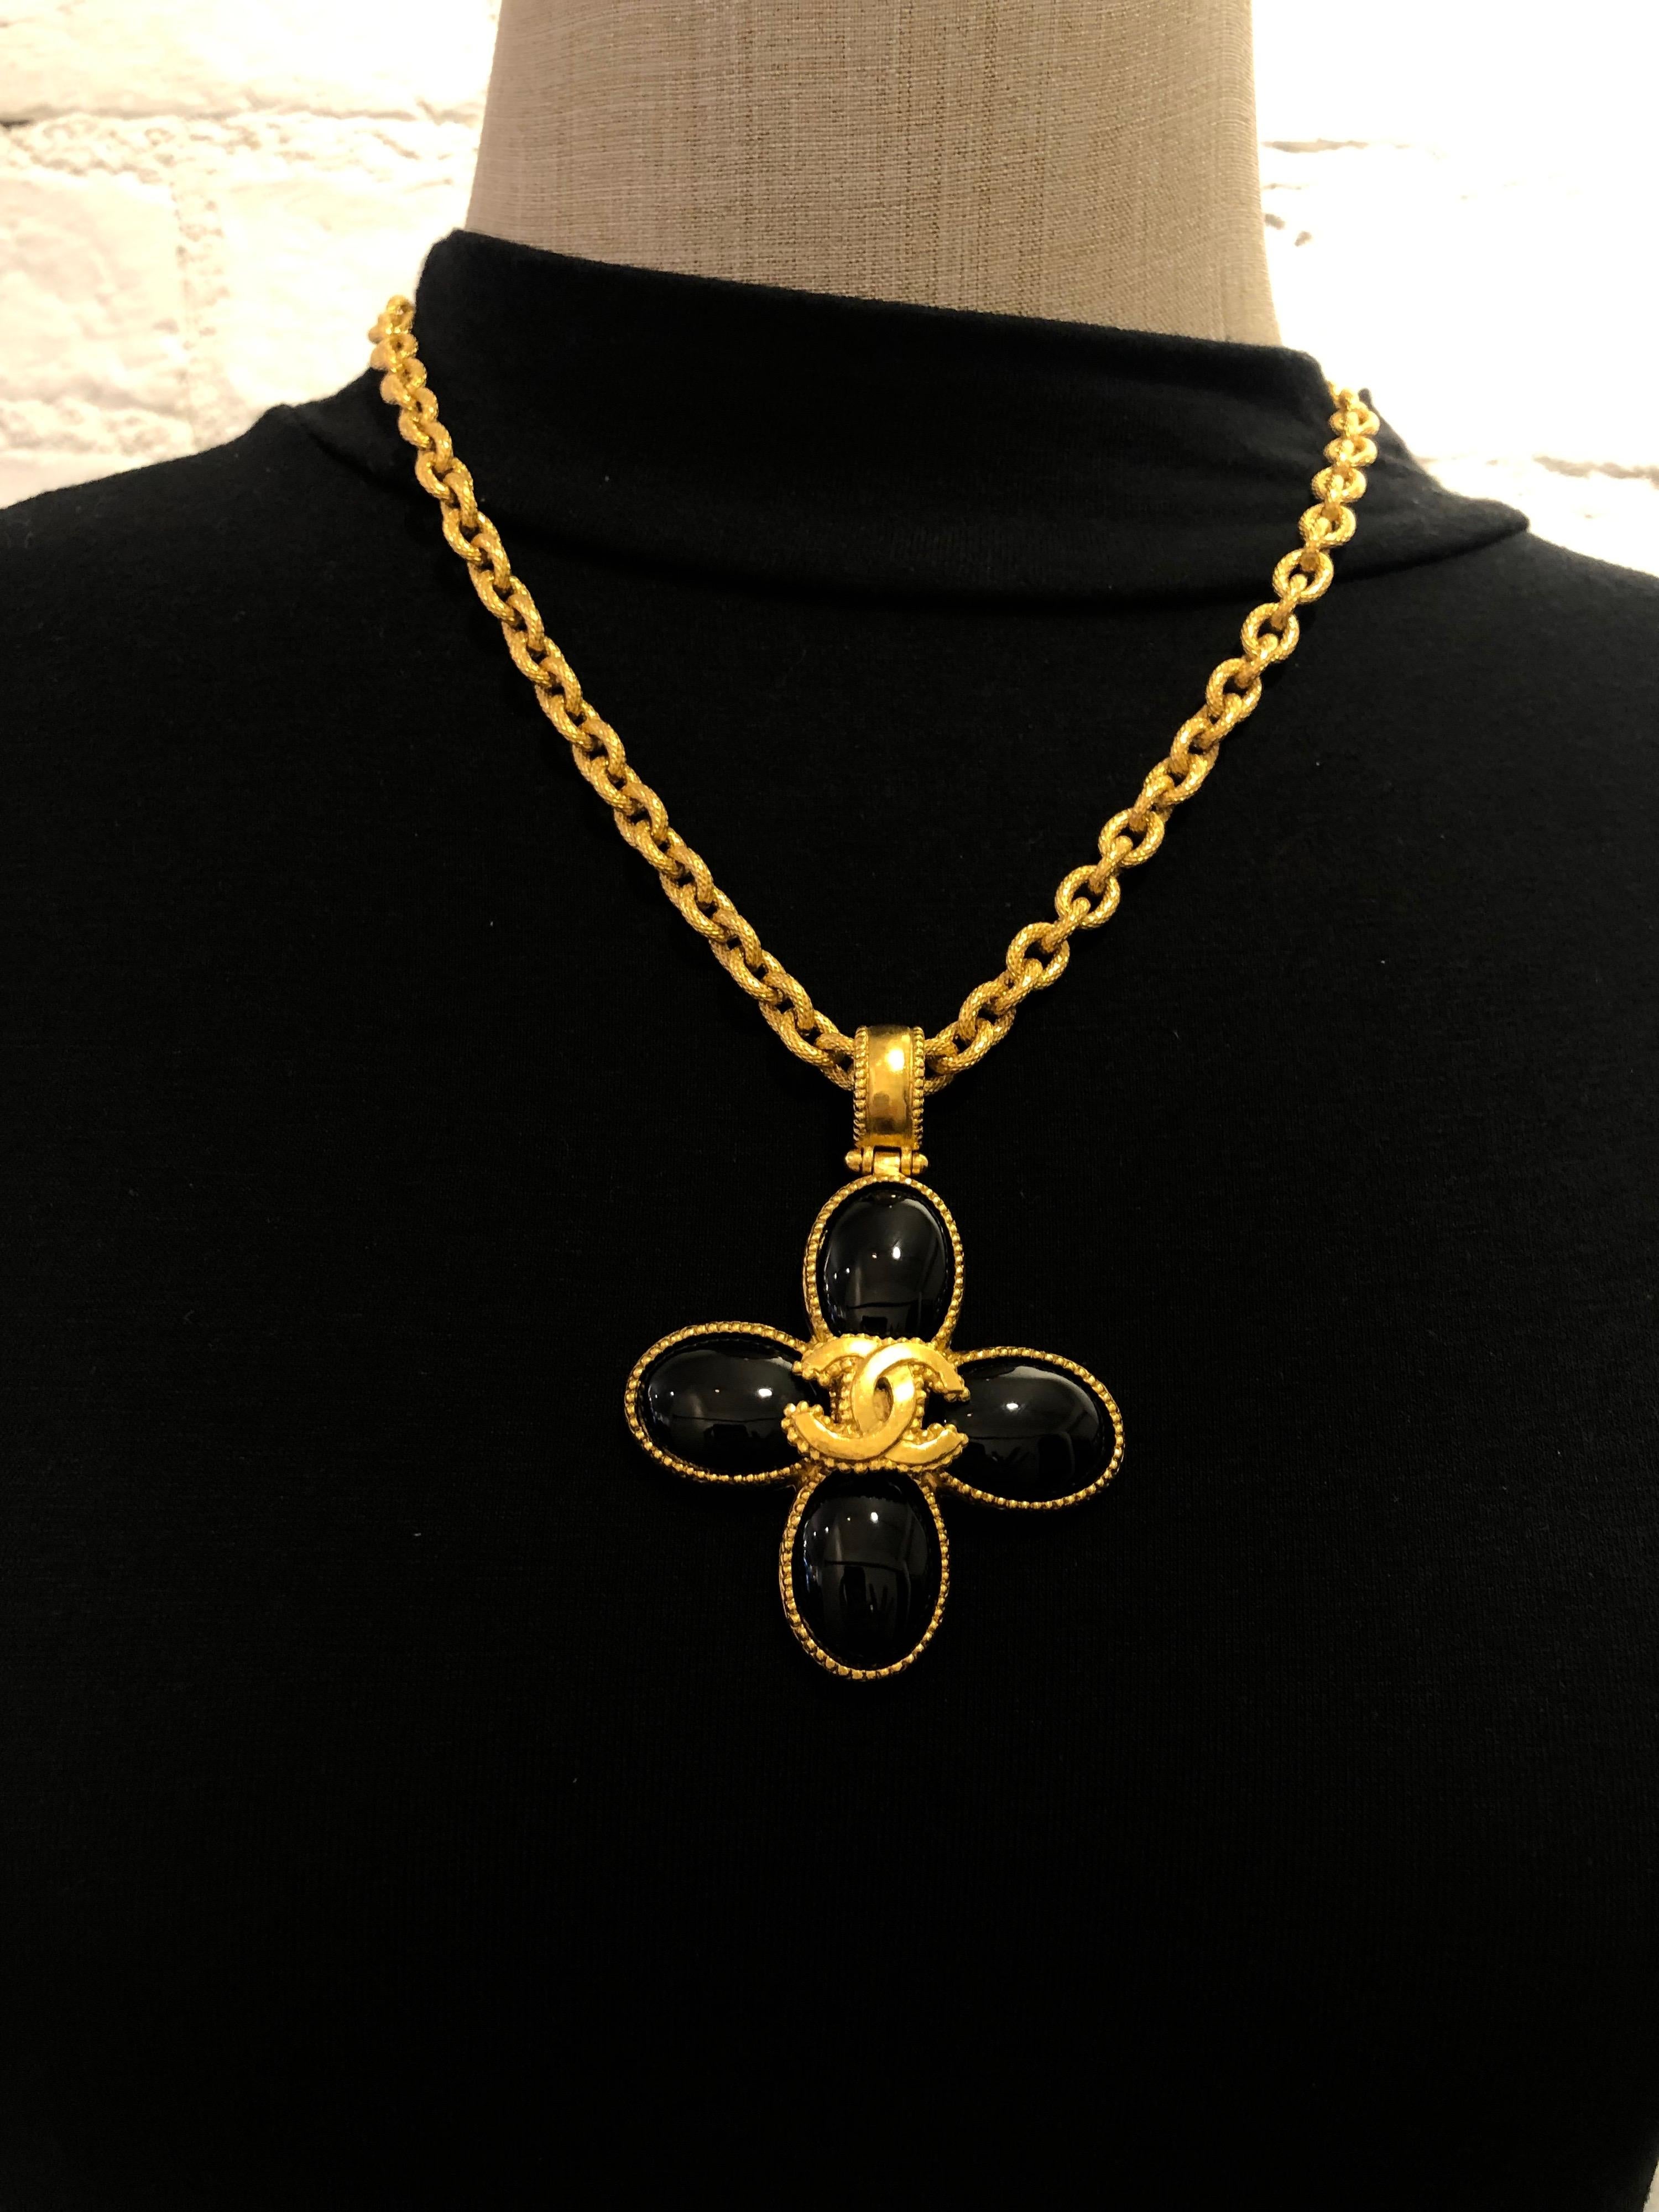 Chanel Resin Black Clover Pendant Necklace | Rent Chanel jewelry for  $55/month - Join Switch